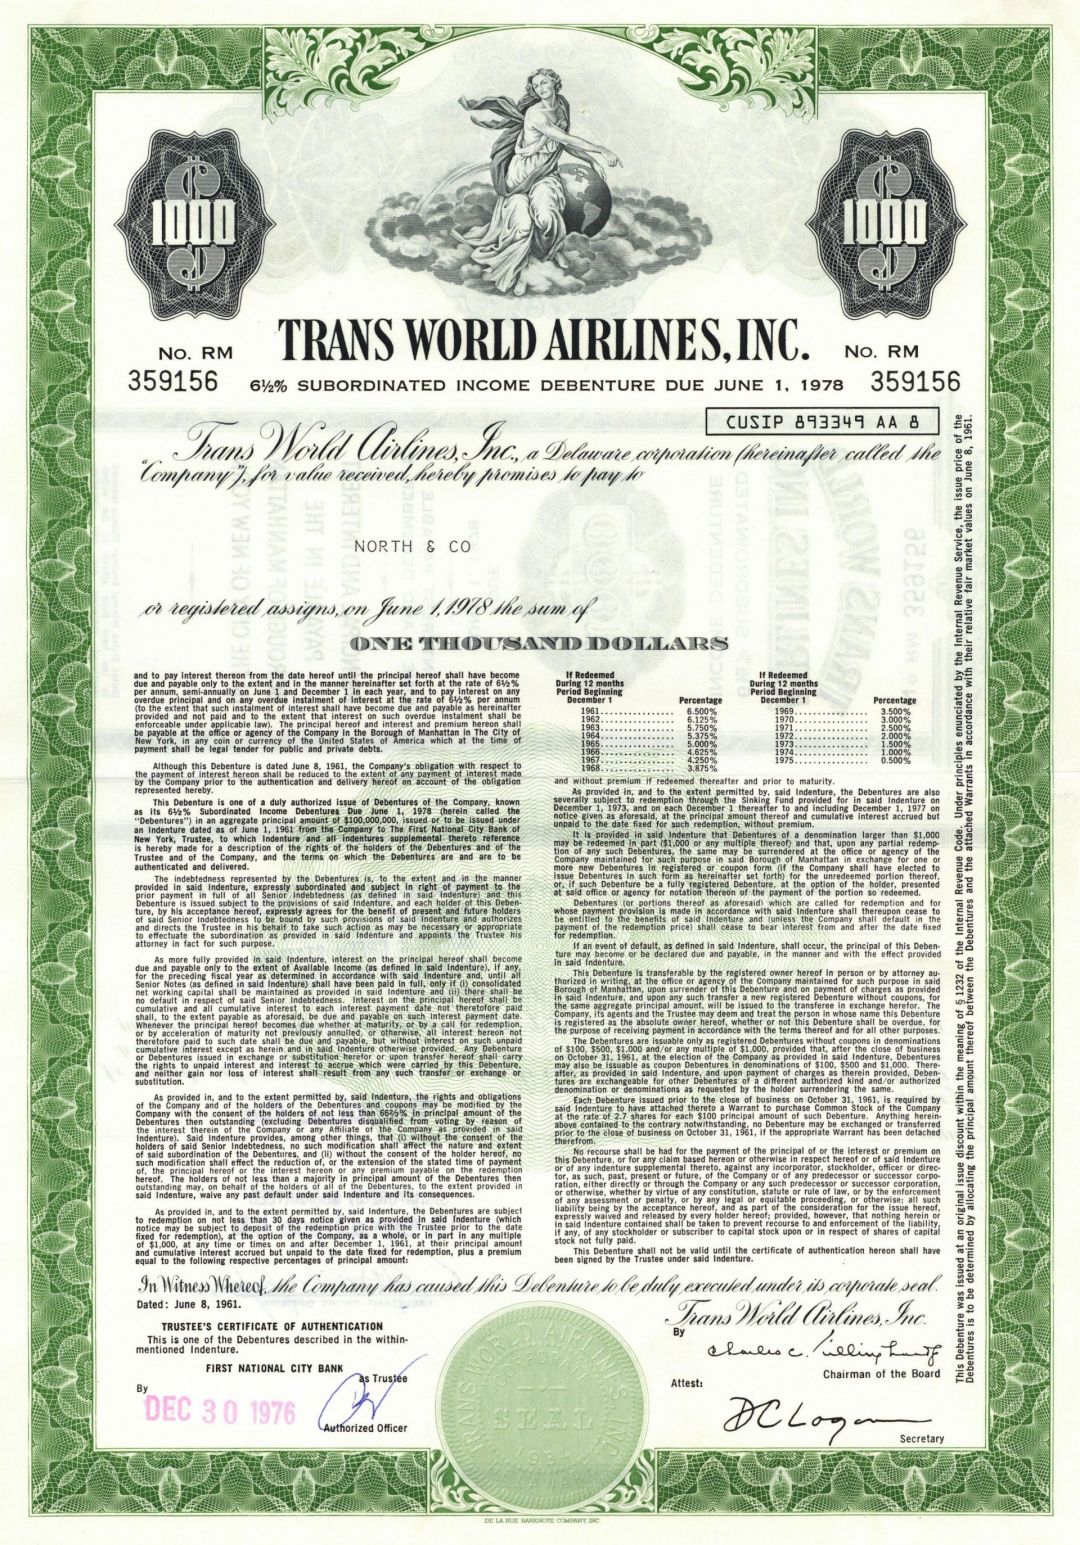 Trans World Airlines, Inc. - Commercial Airline Co. $1,000 Bond - Aviation